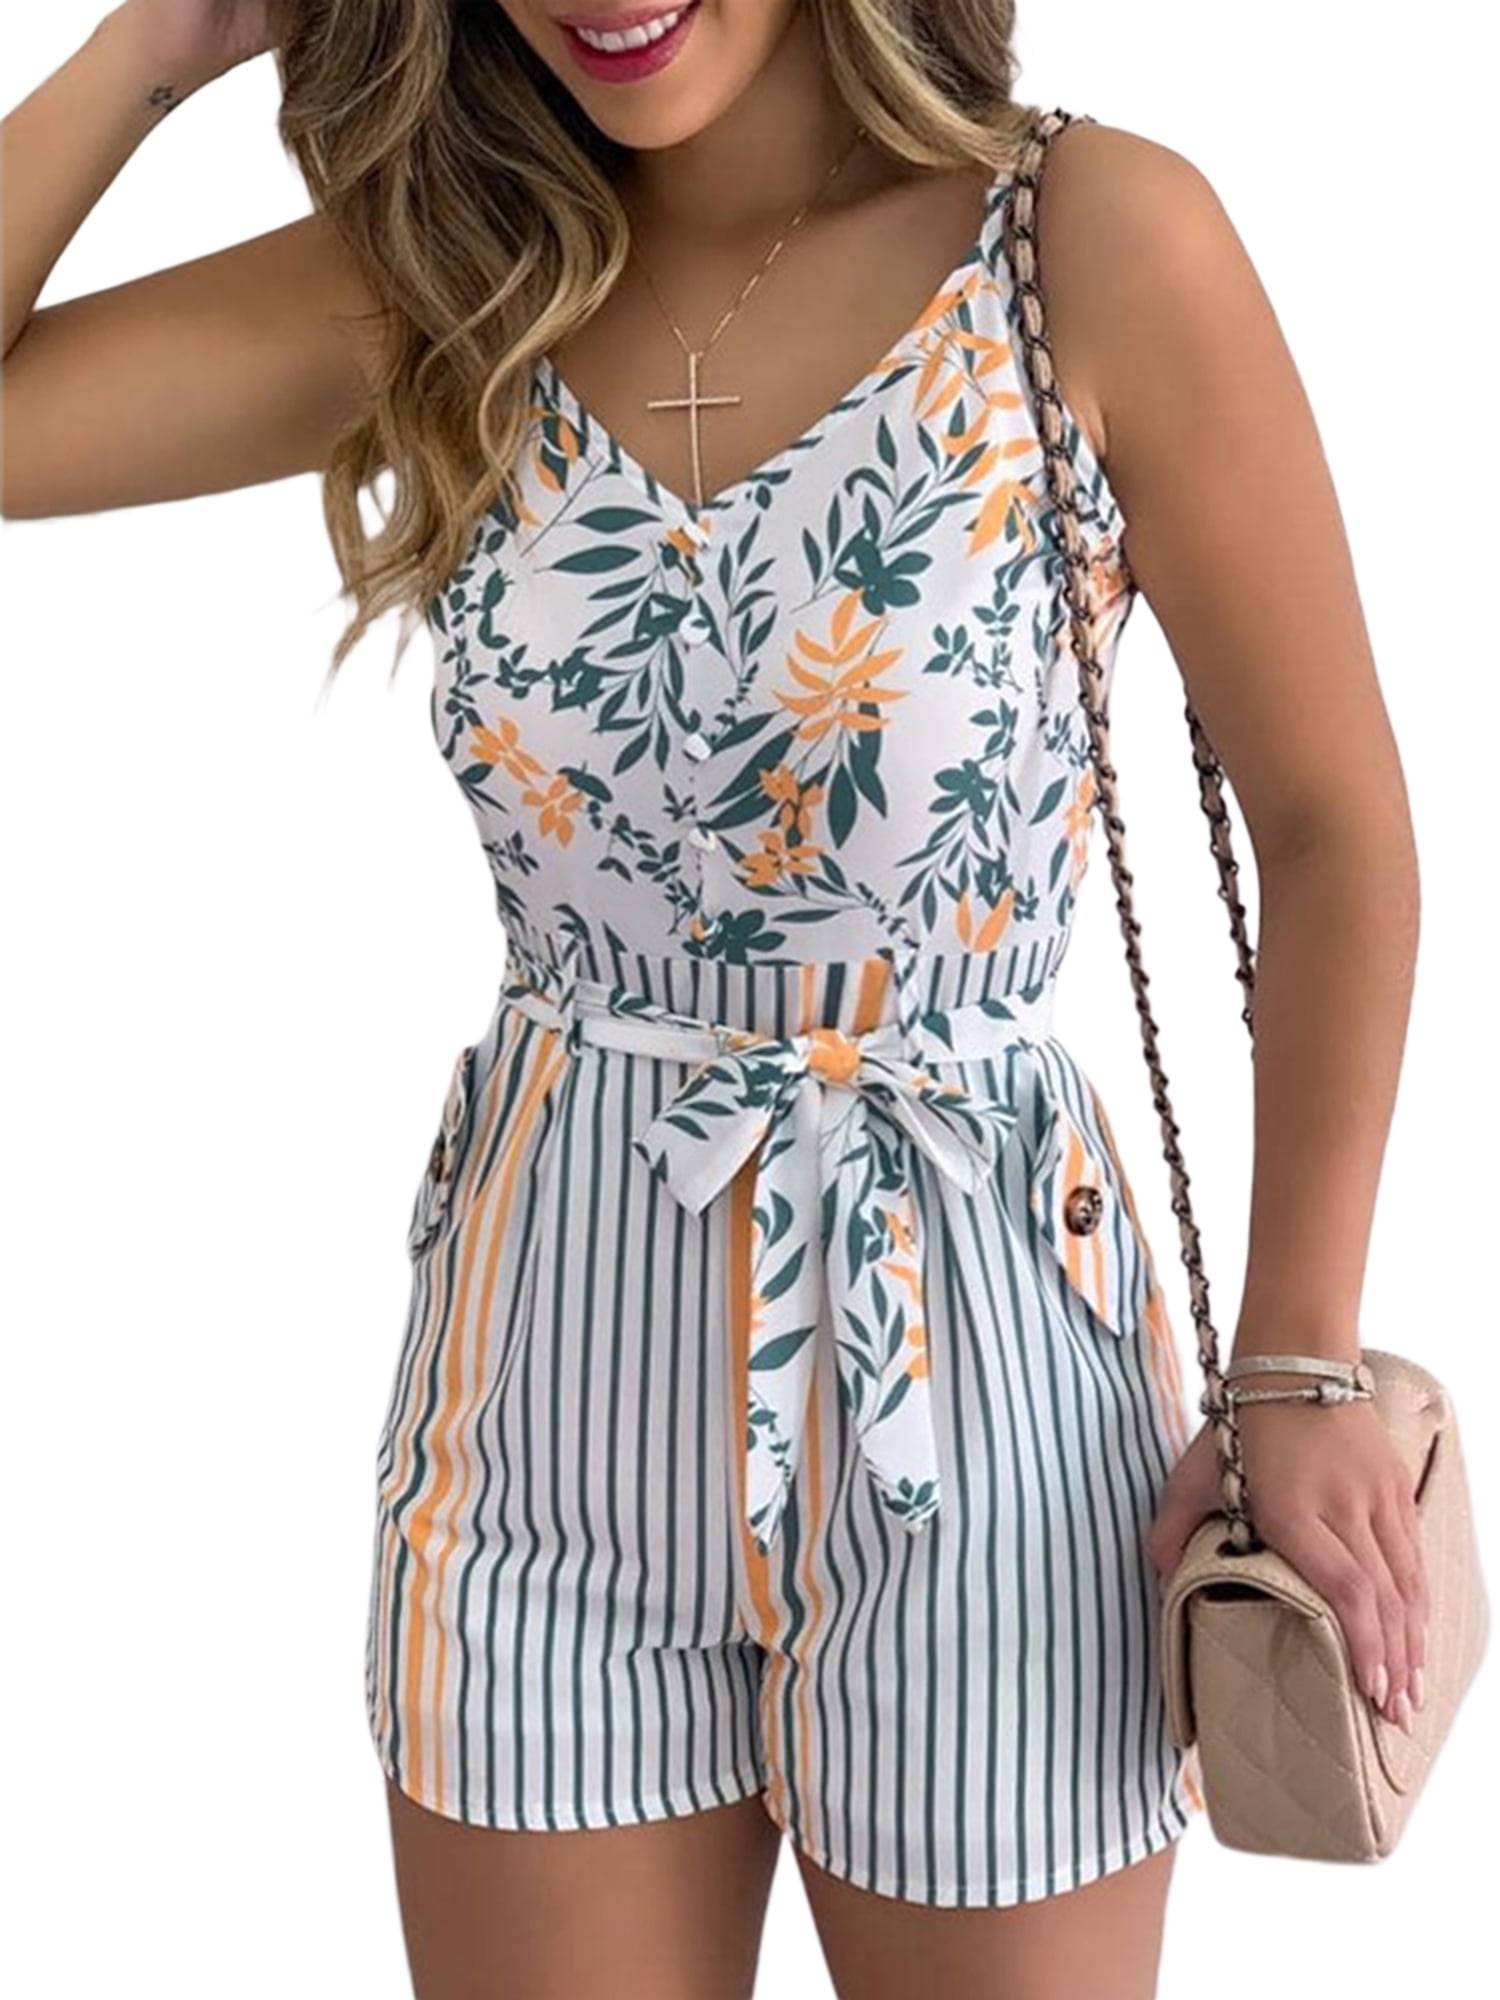 Sew In Love Full Size Pure Delight Floral OffShoulder Romper Jumpsuits   Rompers USA  usmeeeshop